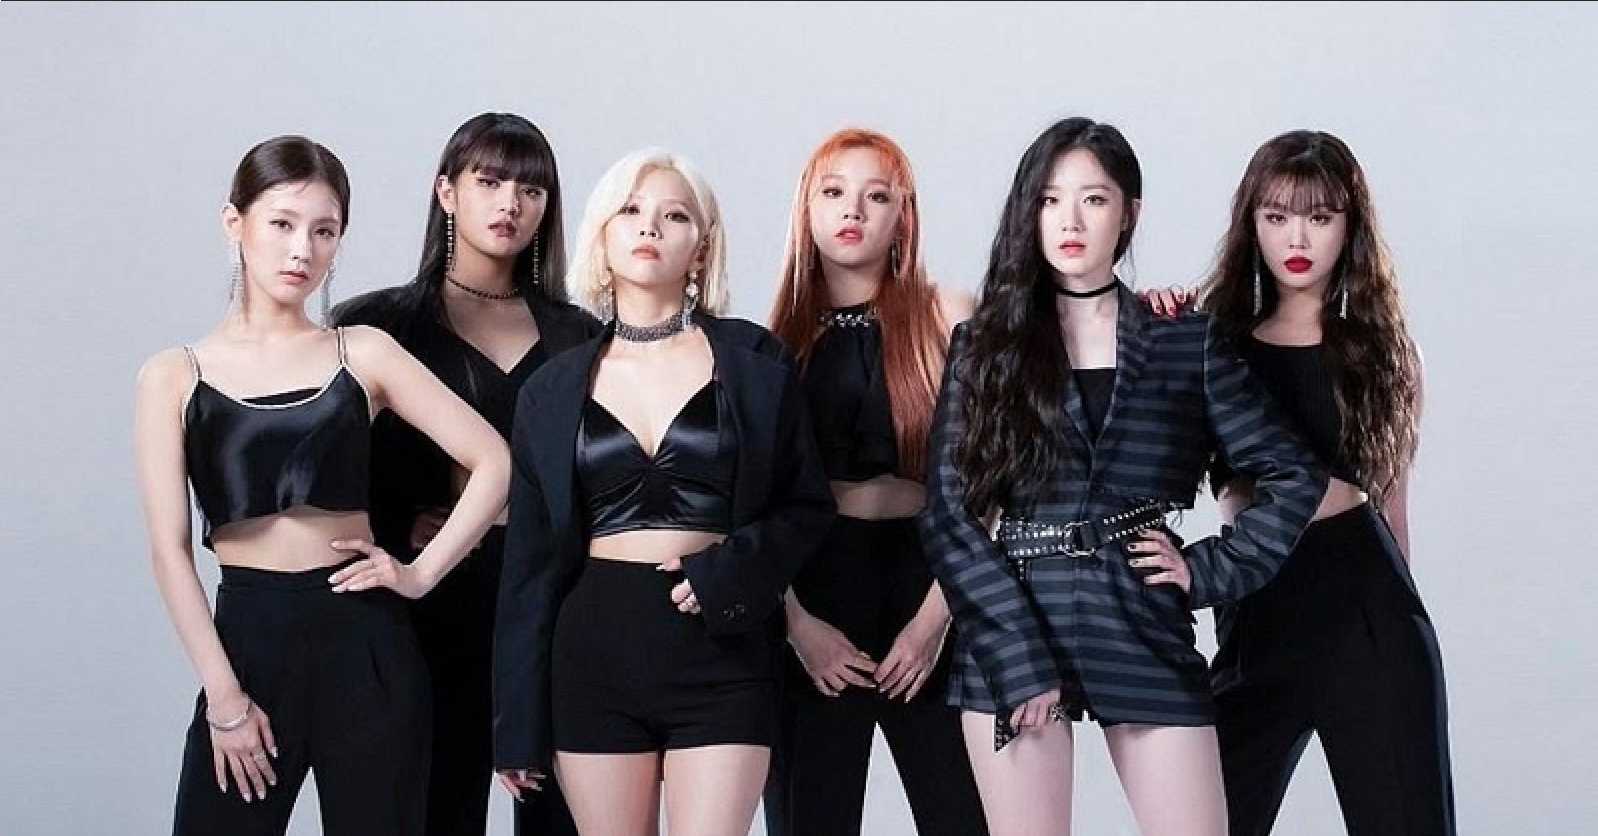 (G)I-DLE Becomes 1 of the Only Four K-pop Girl Groups to Score Impressive Spotify Streams